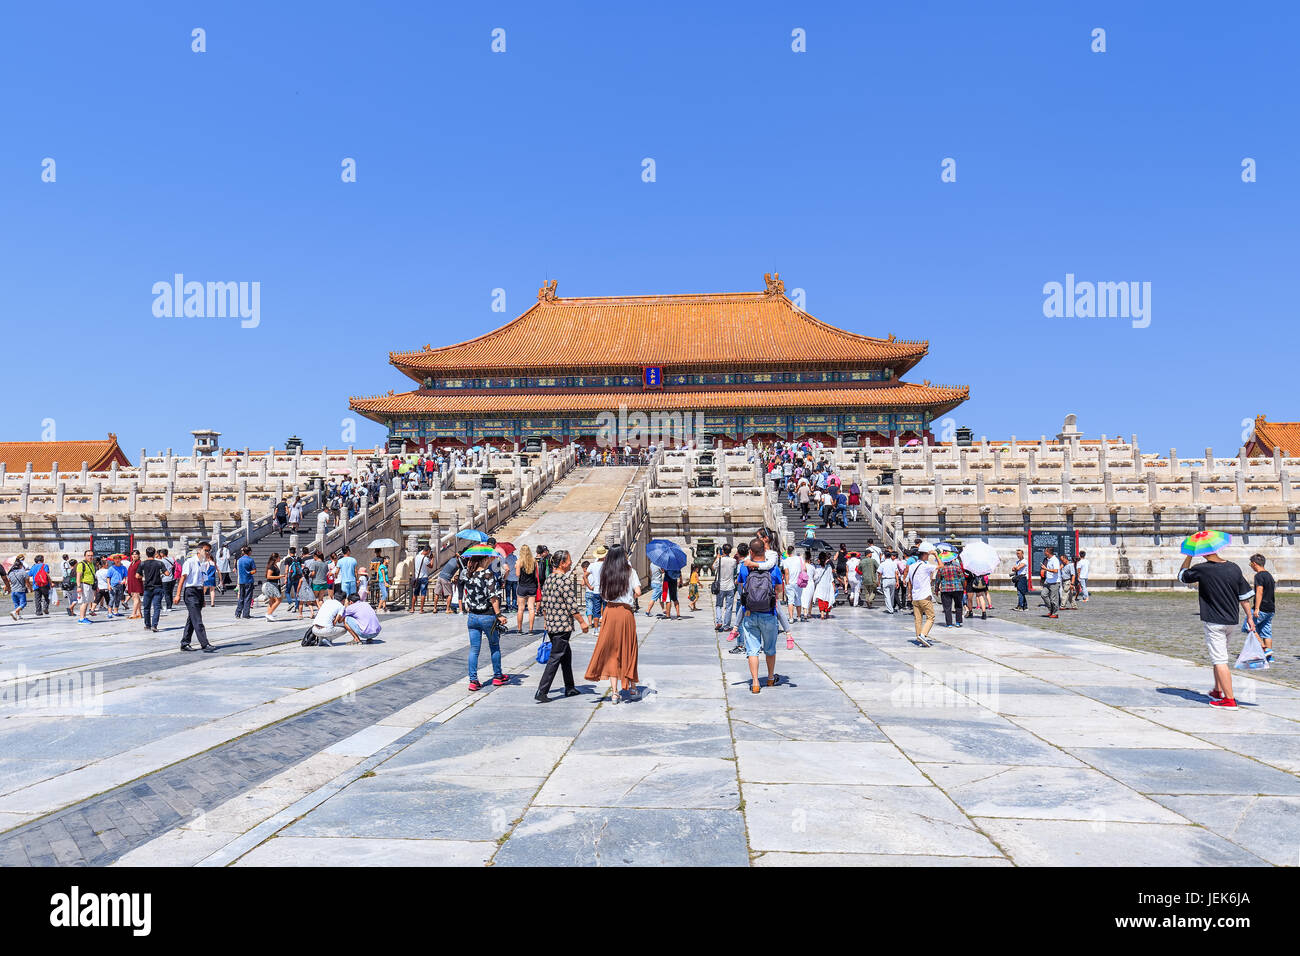 BEIJING-AUGUST 28, 2016. Tourism at Palace Museum (Forbidden City). It was listed as a World Heritage Site in 1987 by UNESCO. Stock Photo